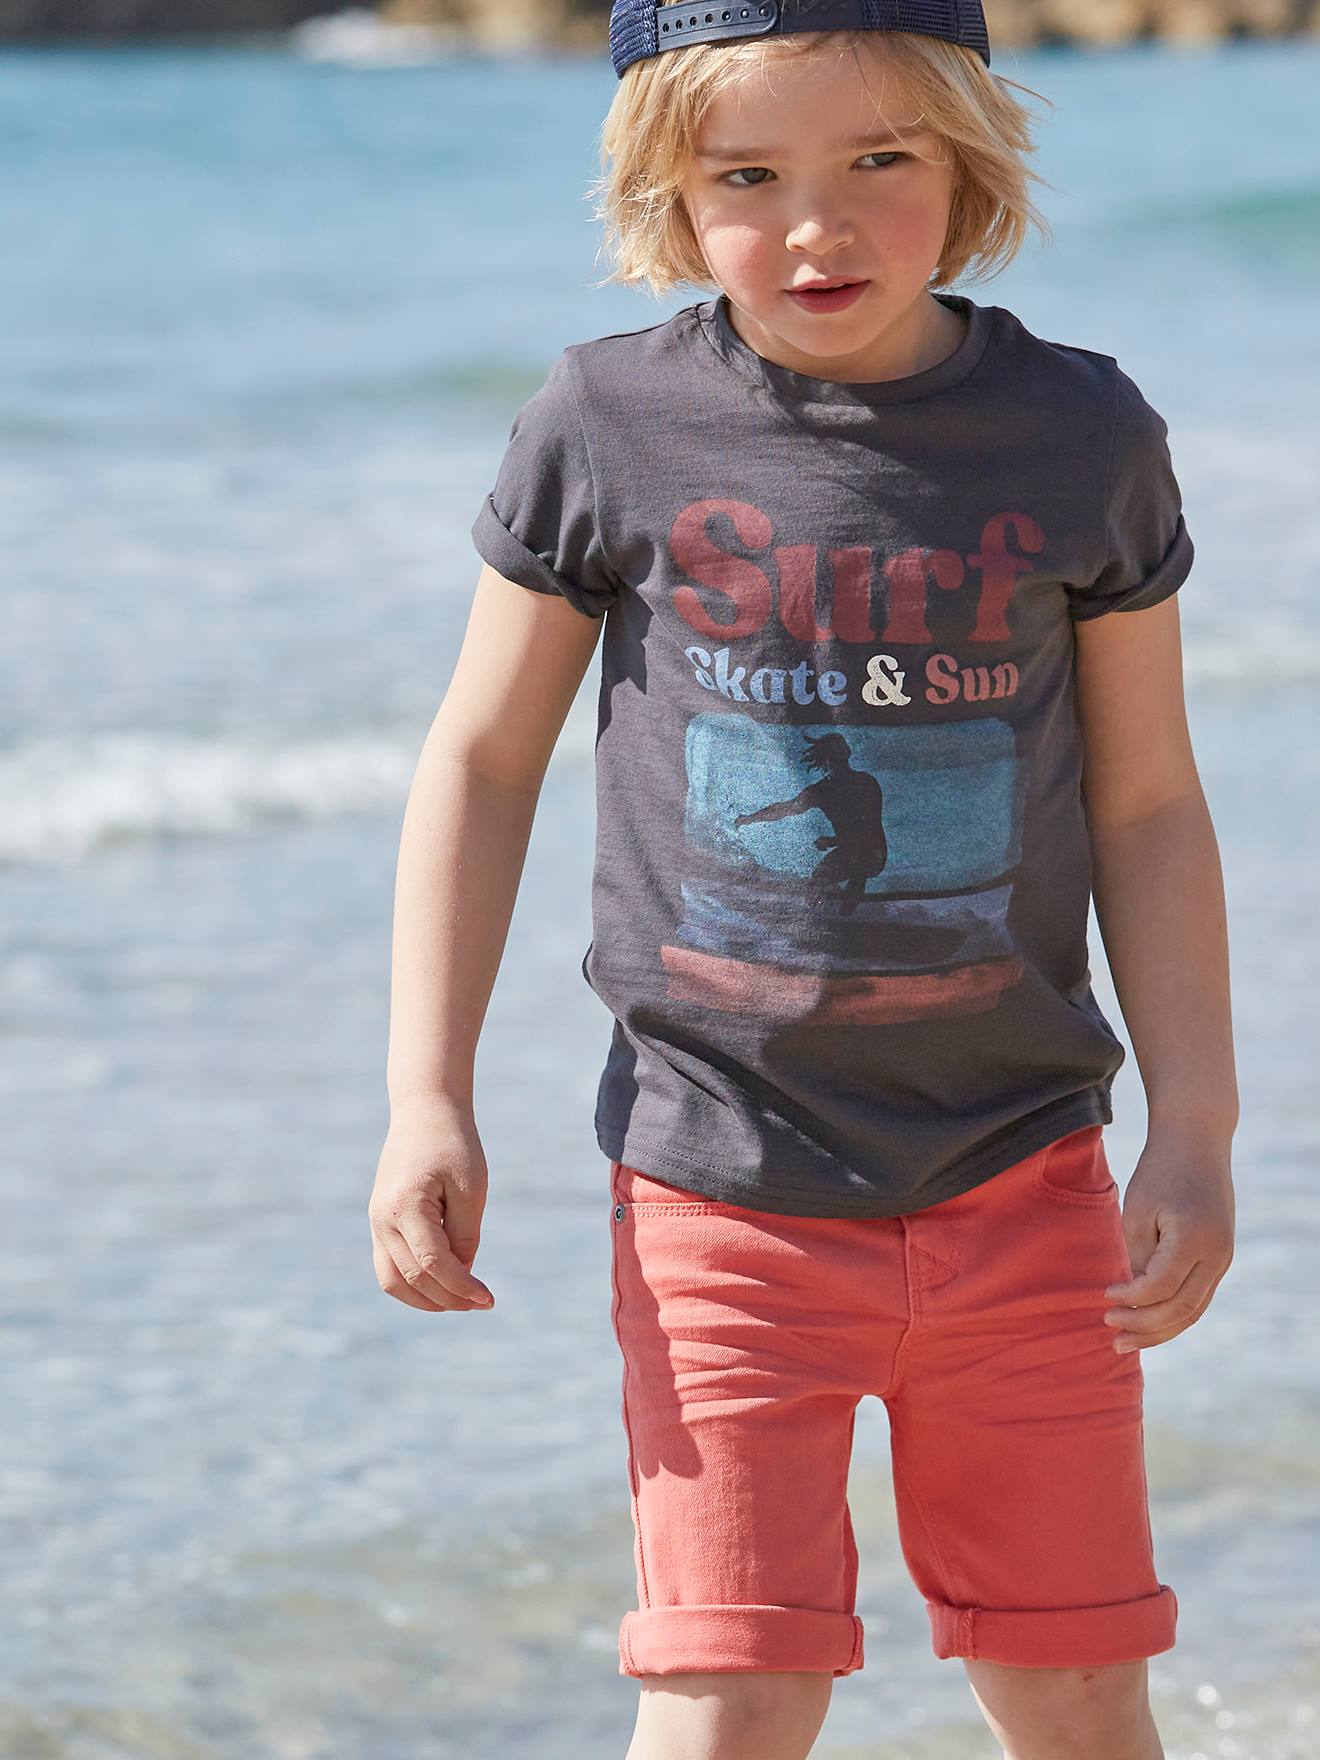 Short Sleeve T Shirt With Surfing Photoprint Motif For Boys Grey Boys